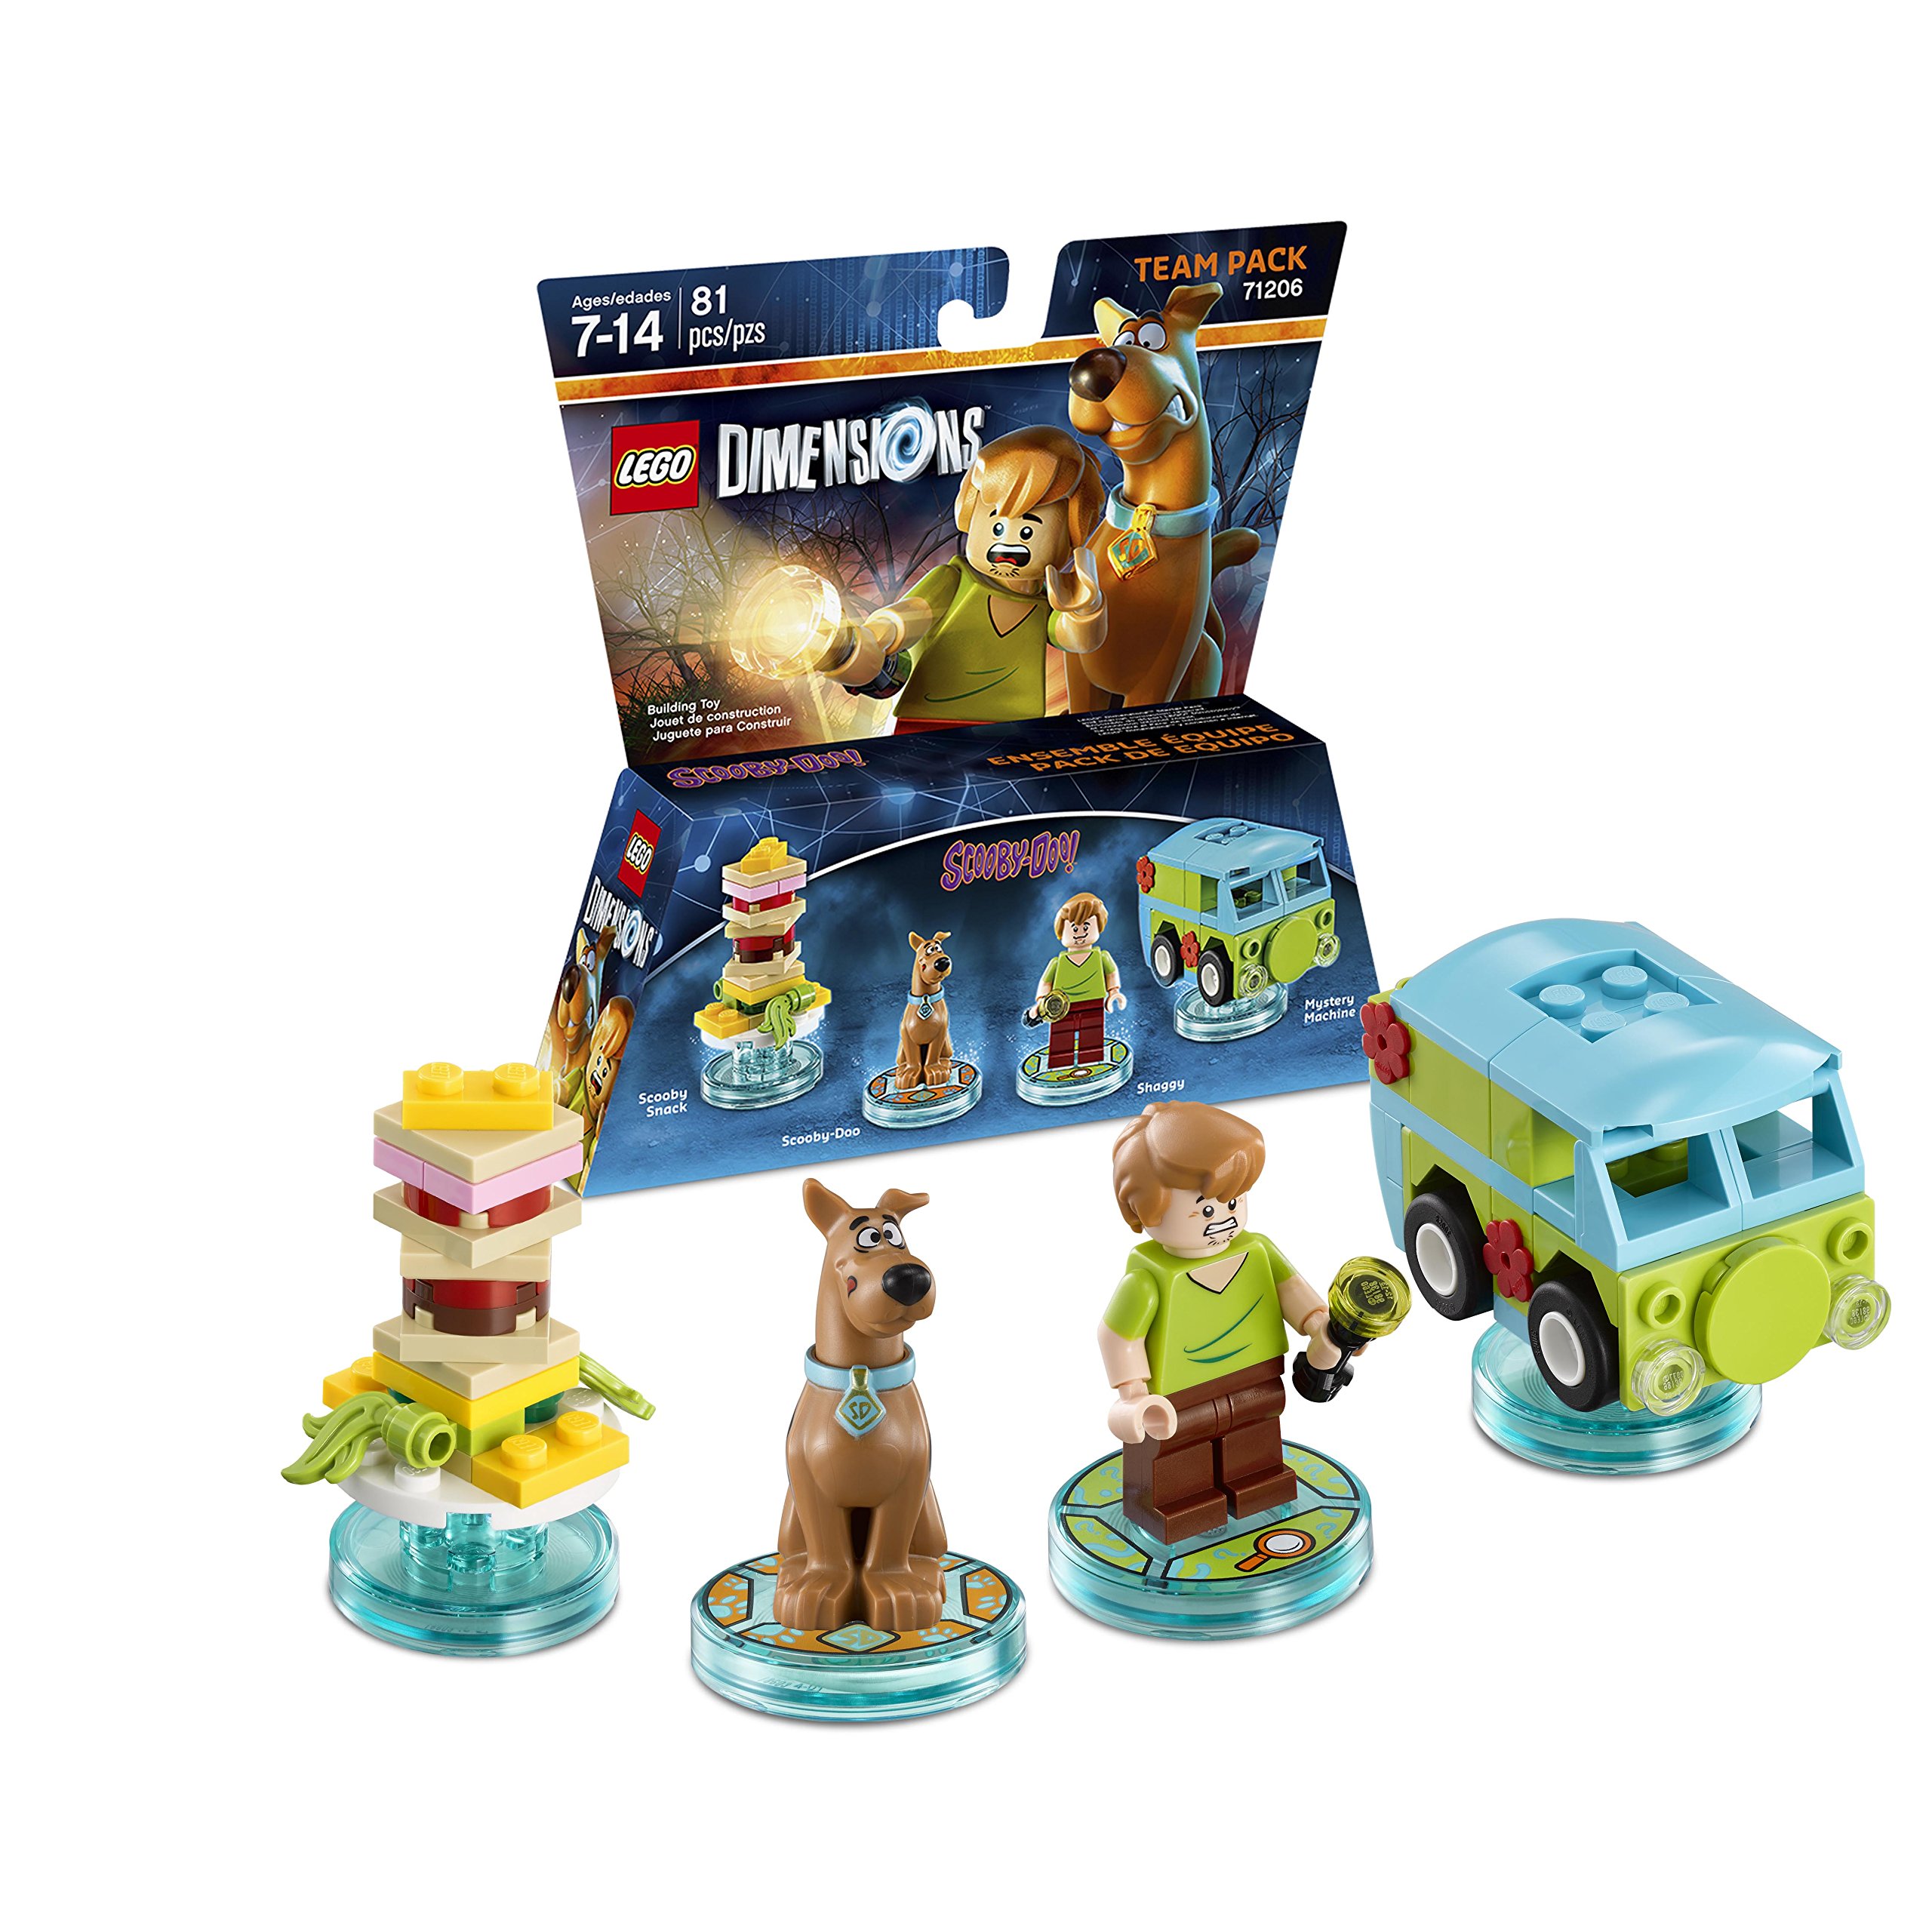 LEGO Dimensions Scooby Doo (Scooby Doo) Team Pack (Universal) - image 4 of 4